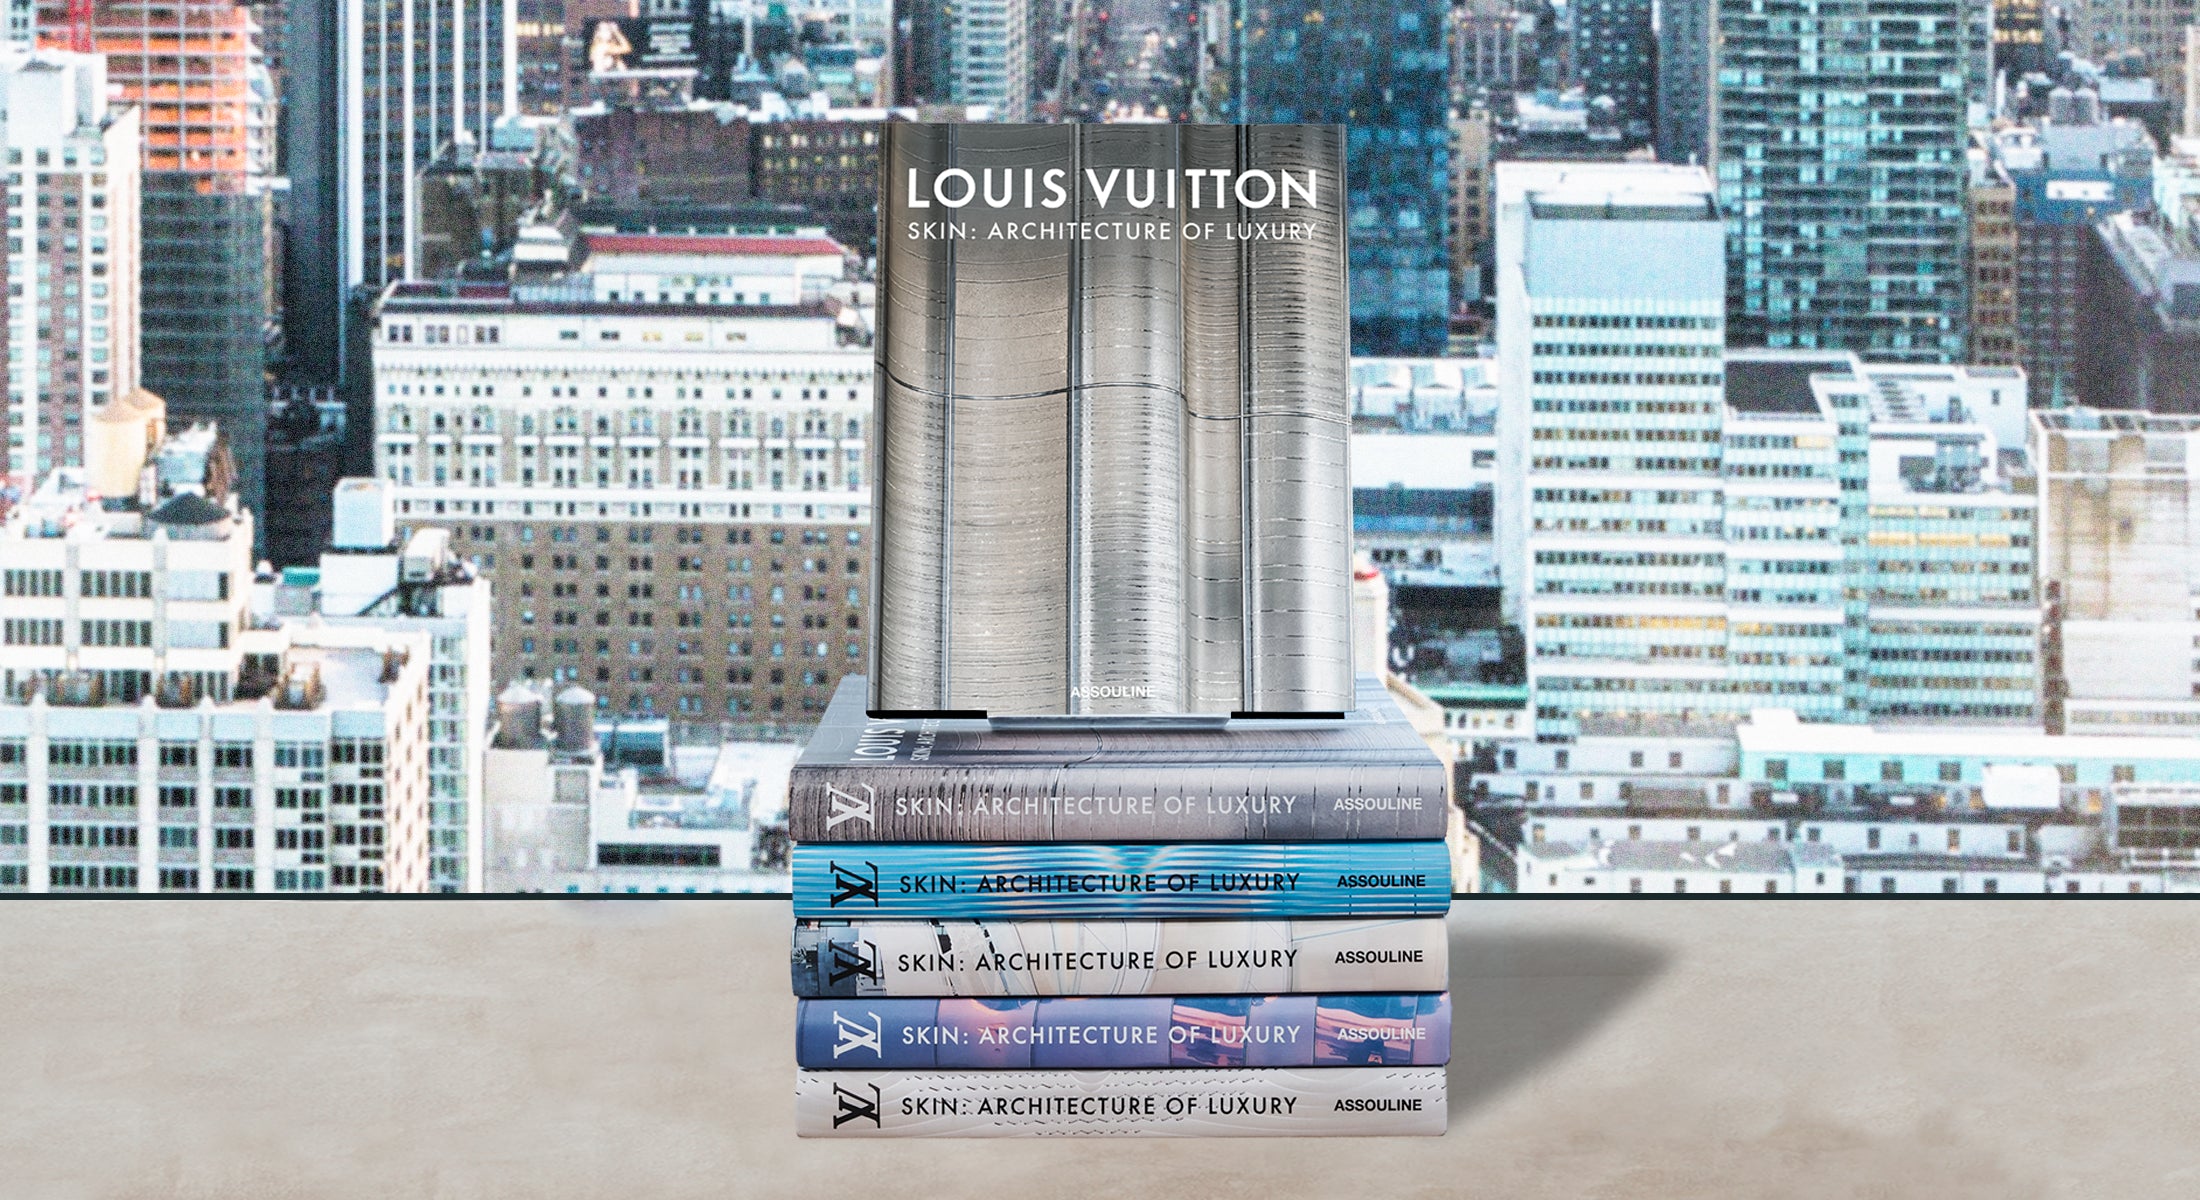 Louis Vuitton Skin: Architecture of Luxury (Beijing Edition) by Paul  Goldberger - Coffee Table Book